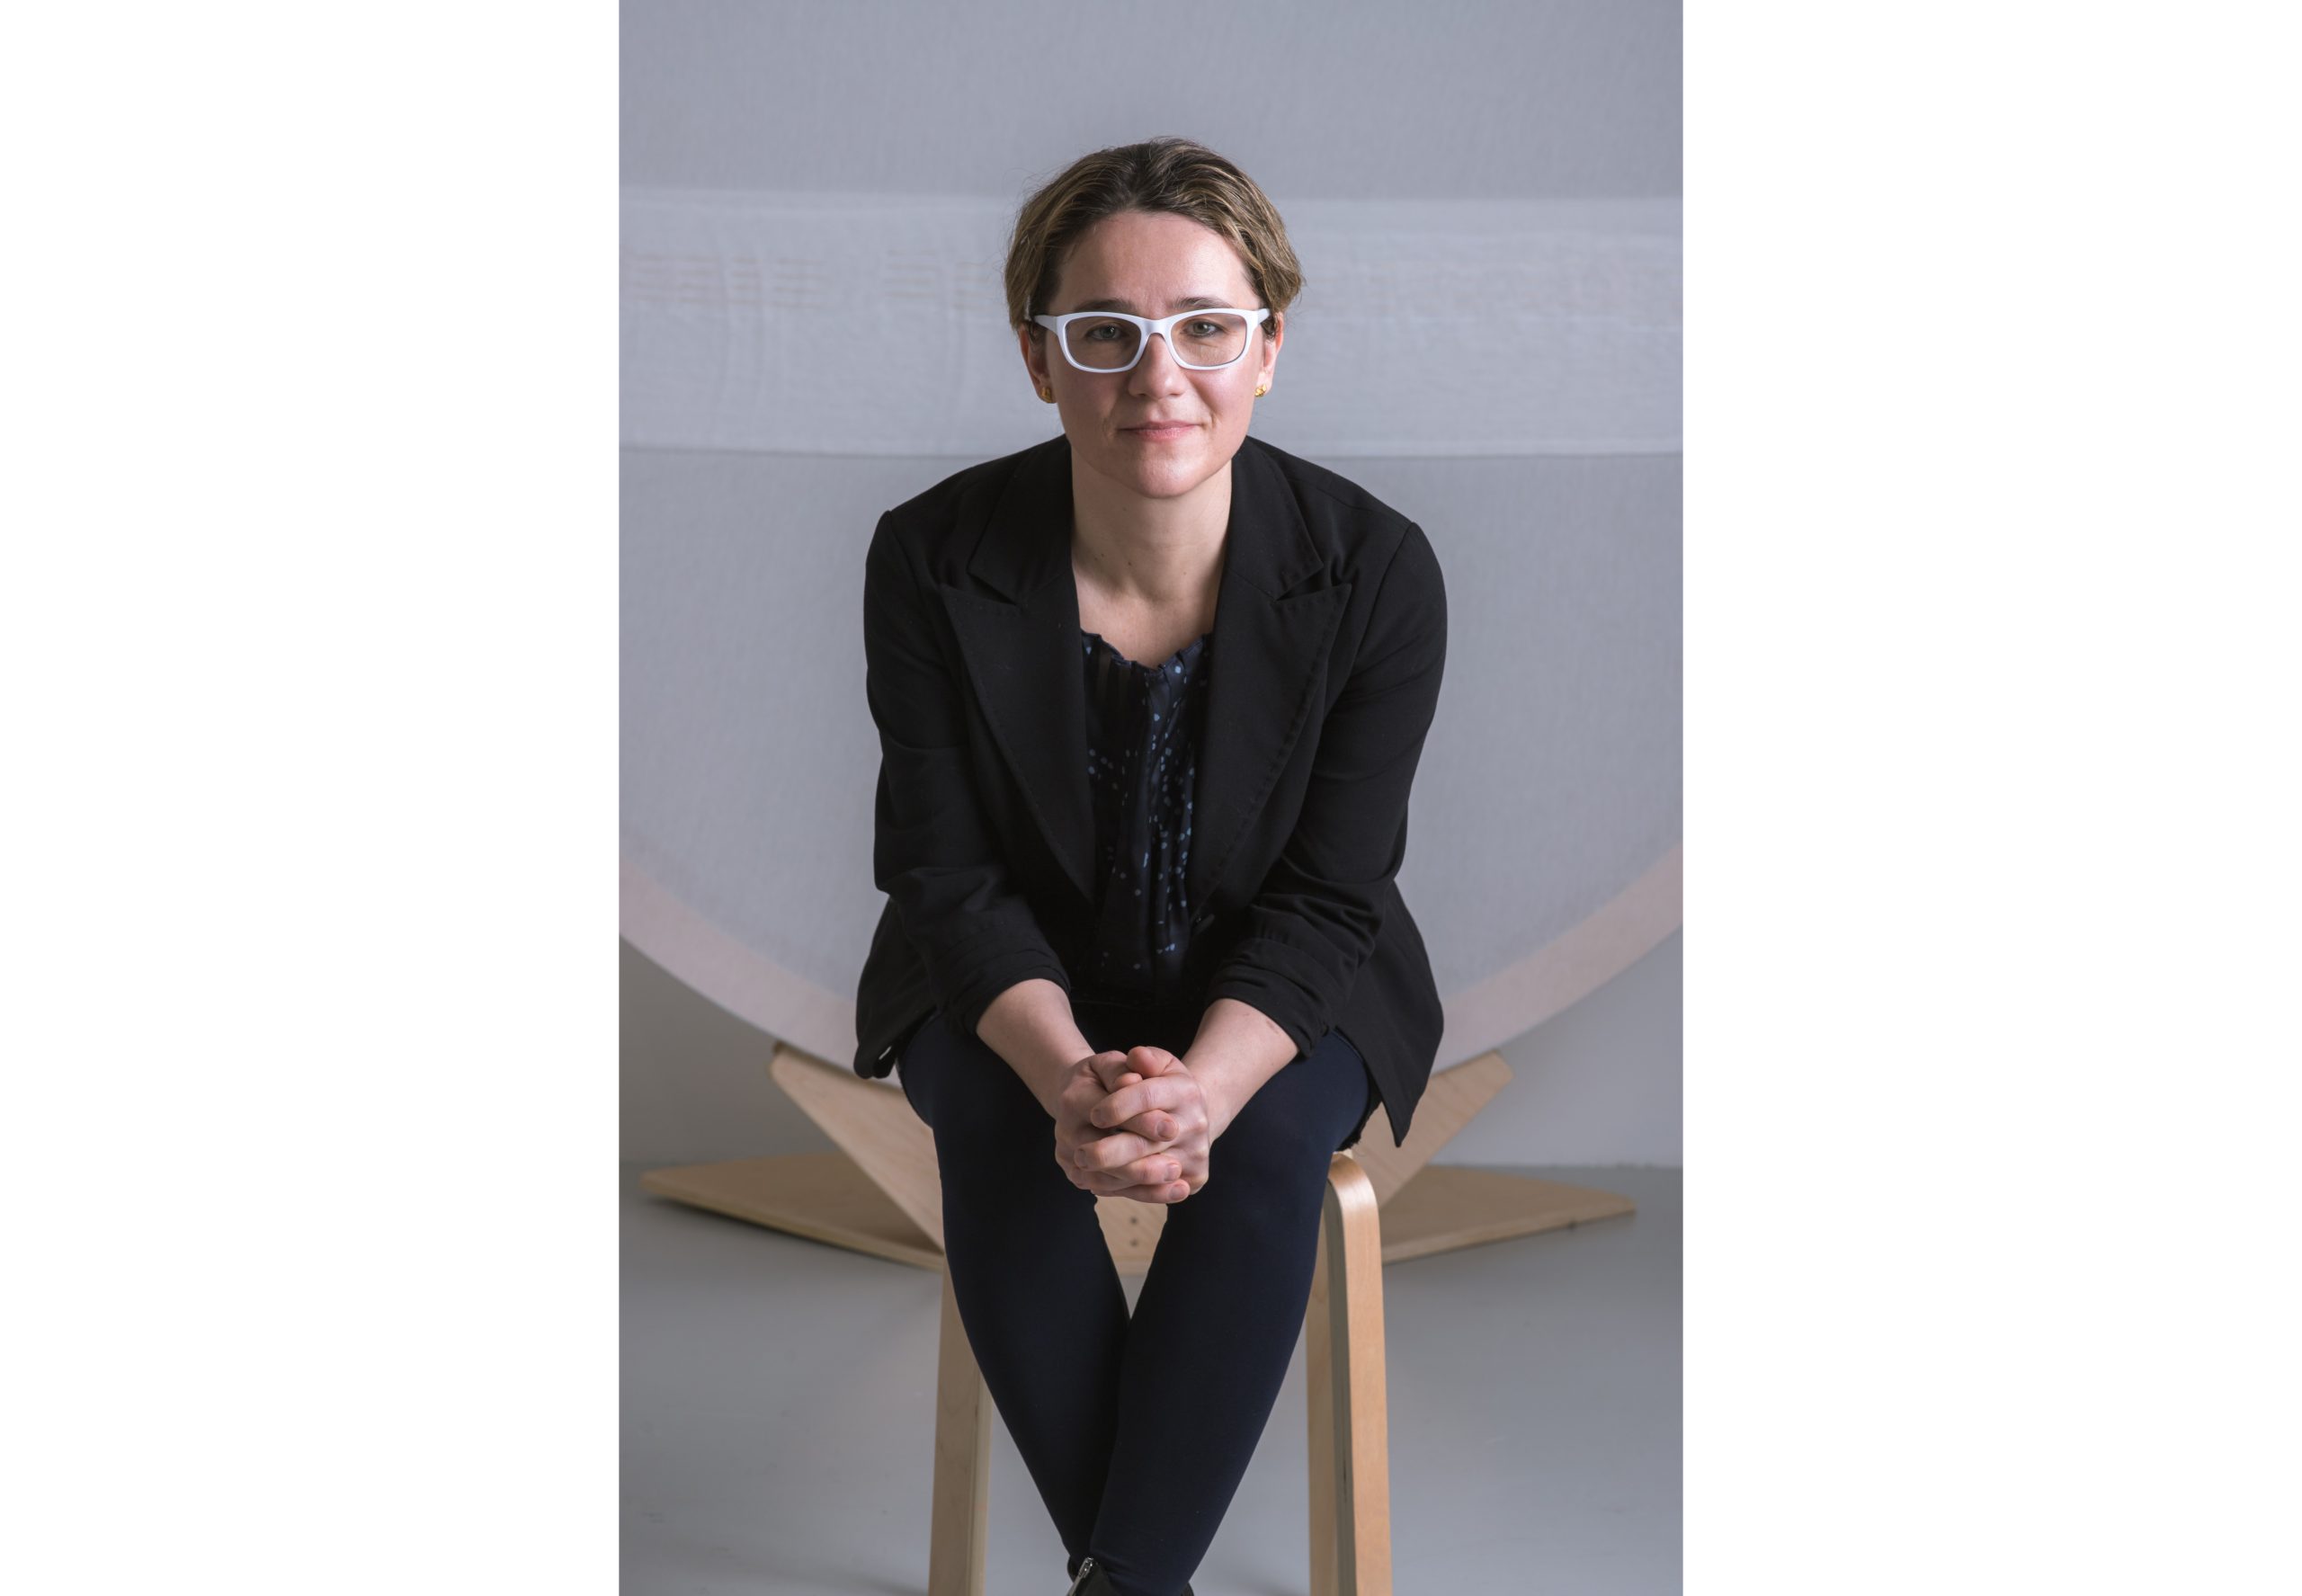 "Portrait of Adelina Vlas, seated and facing the camera, wearing white-framed glasses and a black blazer. Photo by Max Power for D.PE Agency."